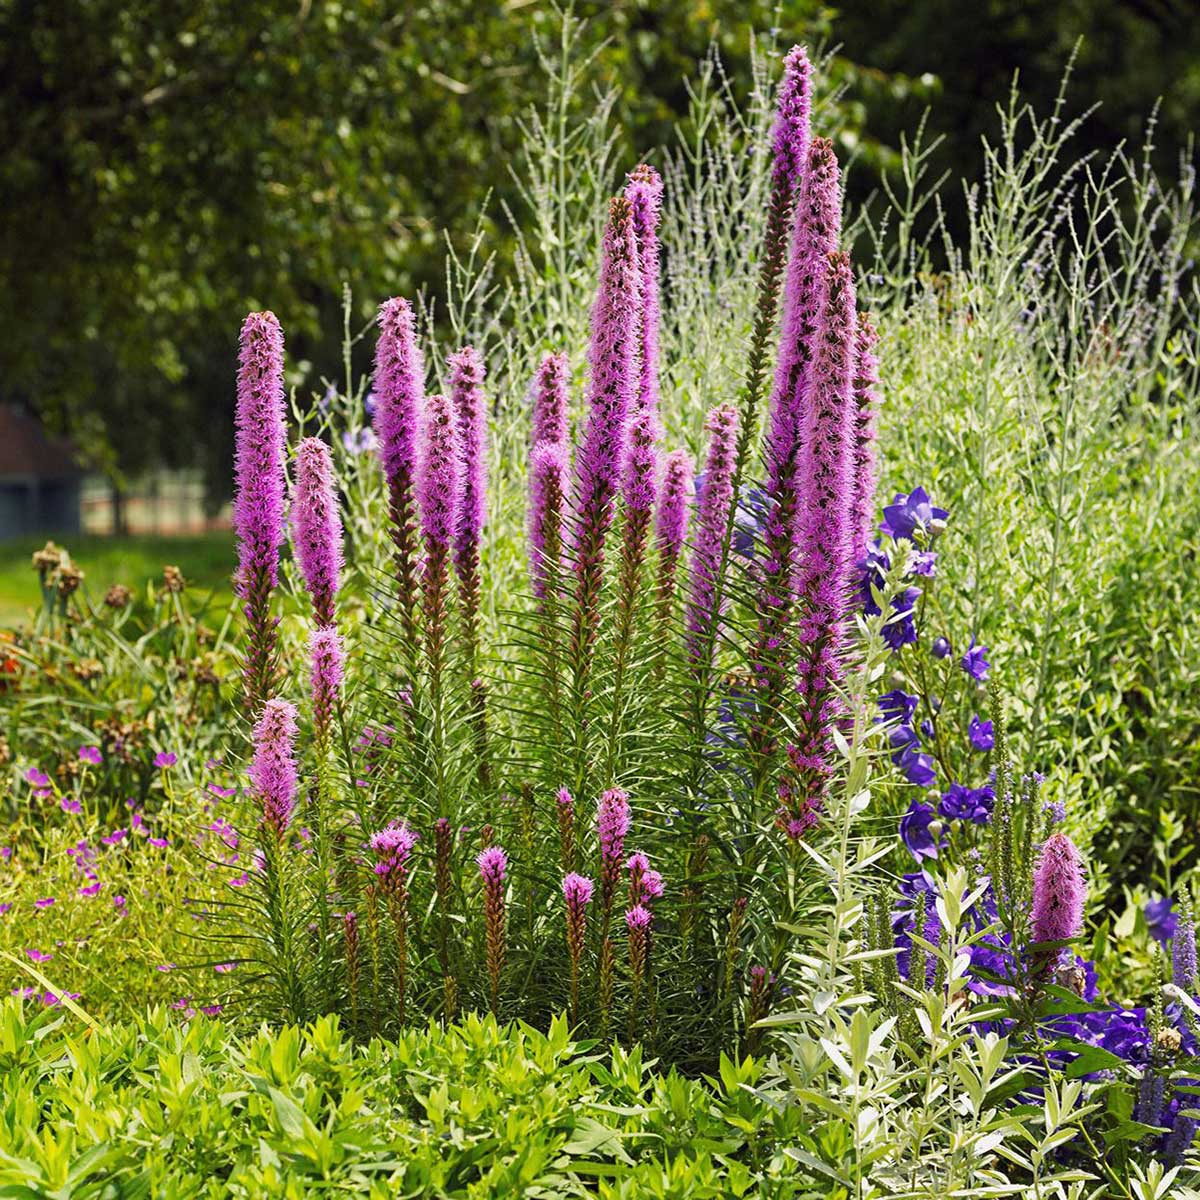 Liatris spicata, or Dense Blazing Star, produces purple flower stalks that emerge from delicate tufts of grass-like basal foliage, with leaves becoming sparse as they move up the rigid stems.